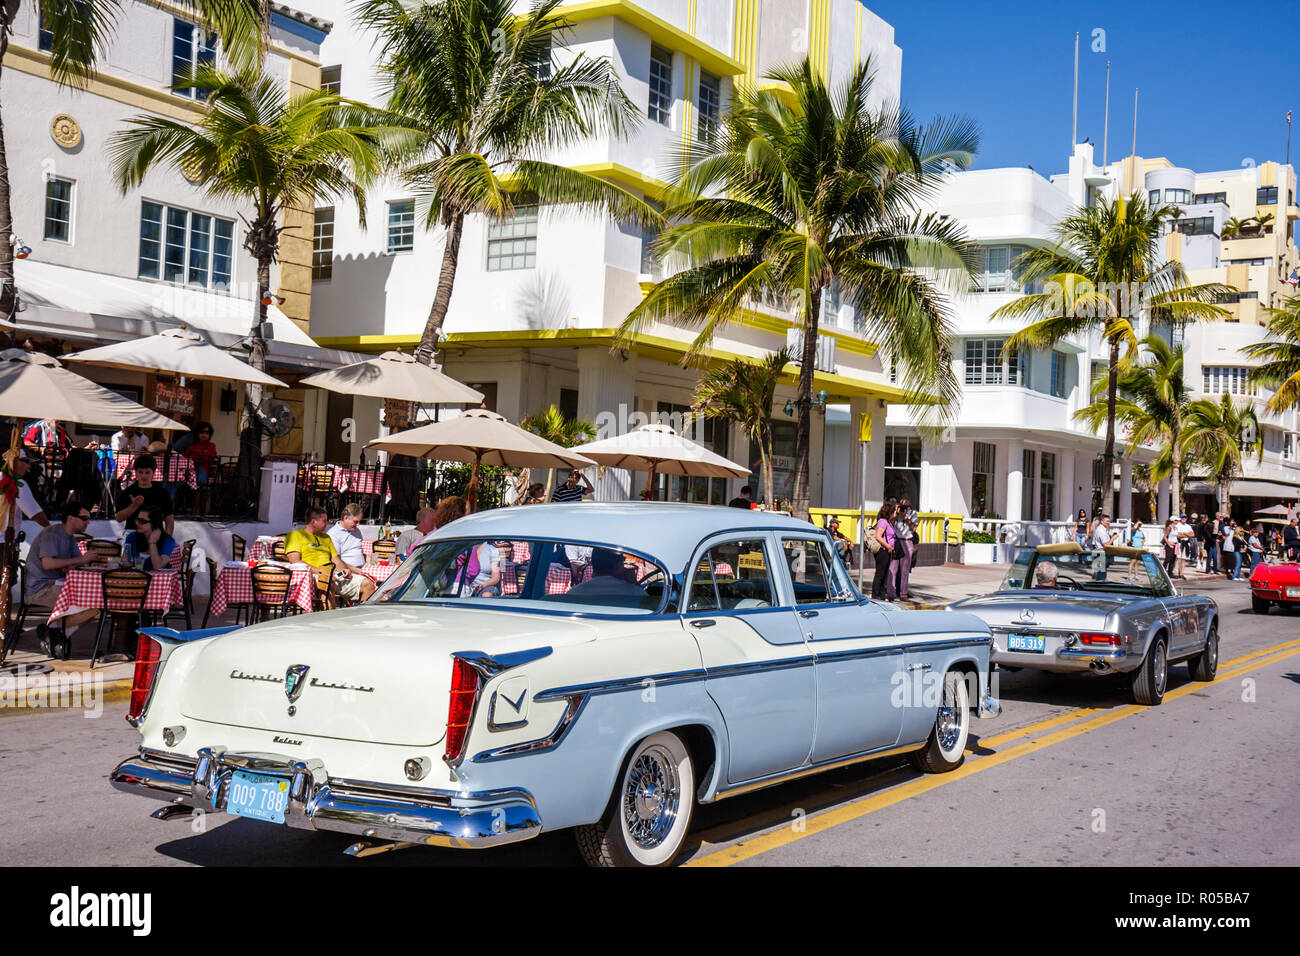 Miami Beach Florida,Ocean Drive,Art Deco Weekend,architecture festival parade,crowd,classic car,vintage,entertainment,palm tree,hotels,Chrysler Windso Stock Photo